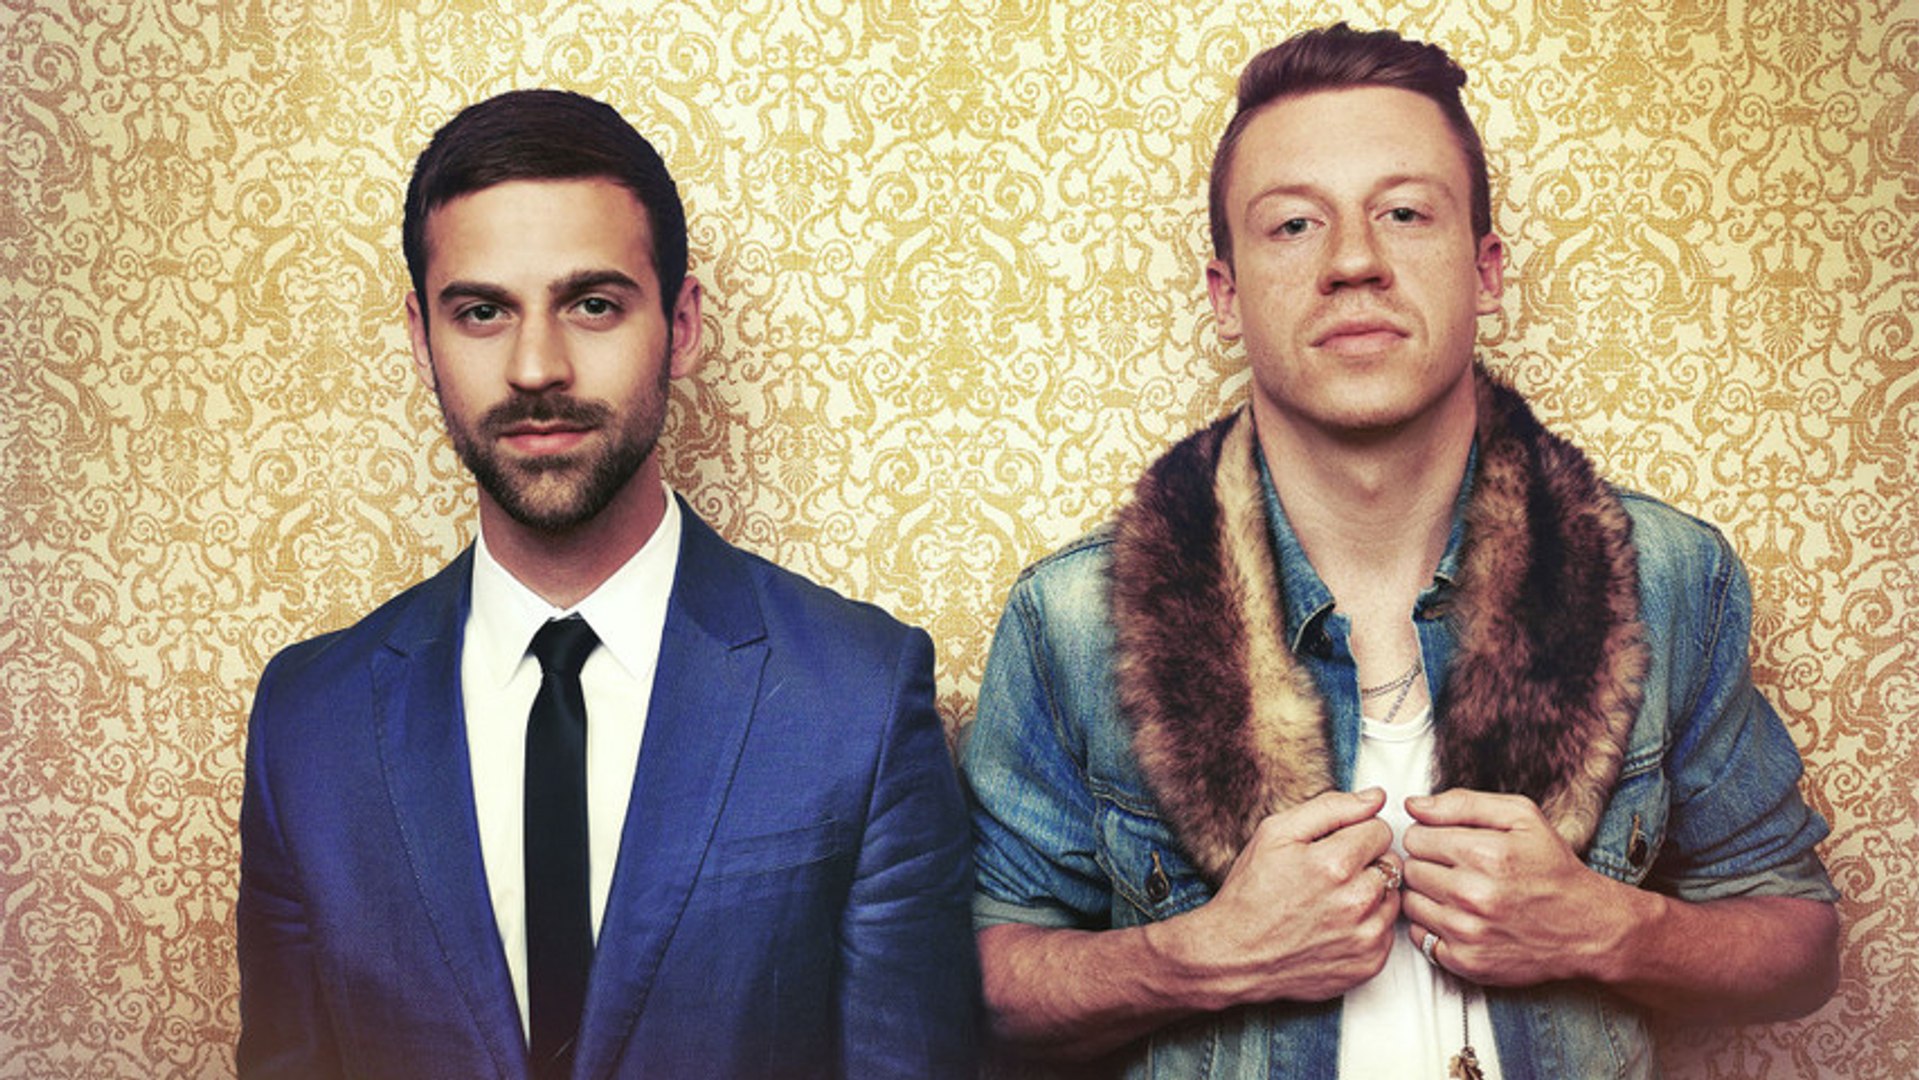 Macklemore and Miley Cyrus Lead 2013 AMA Nominations